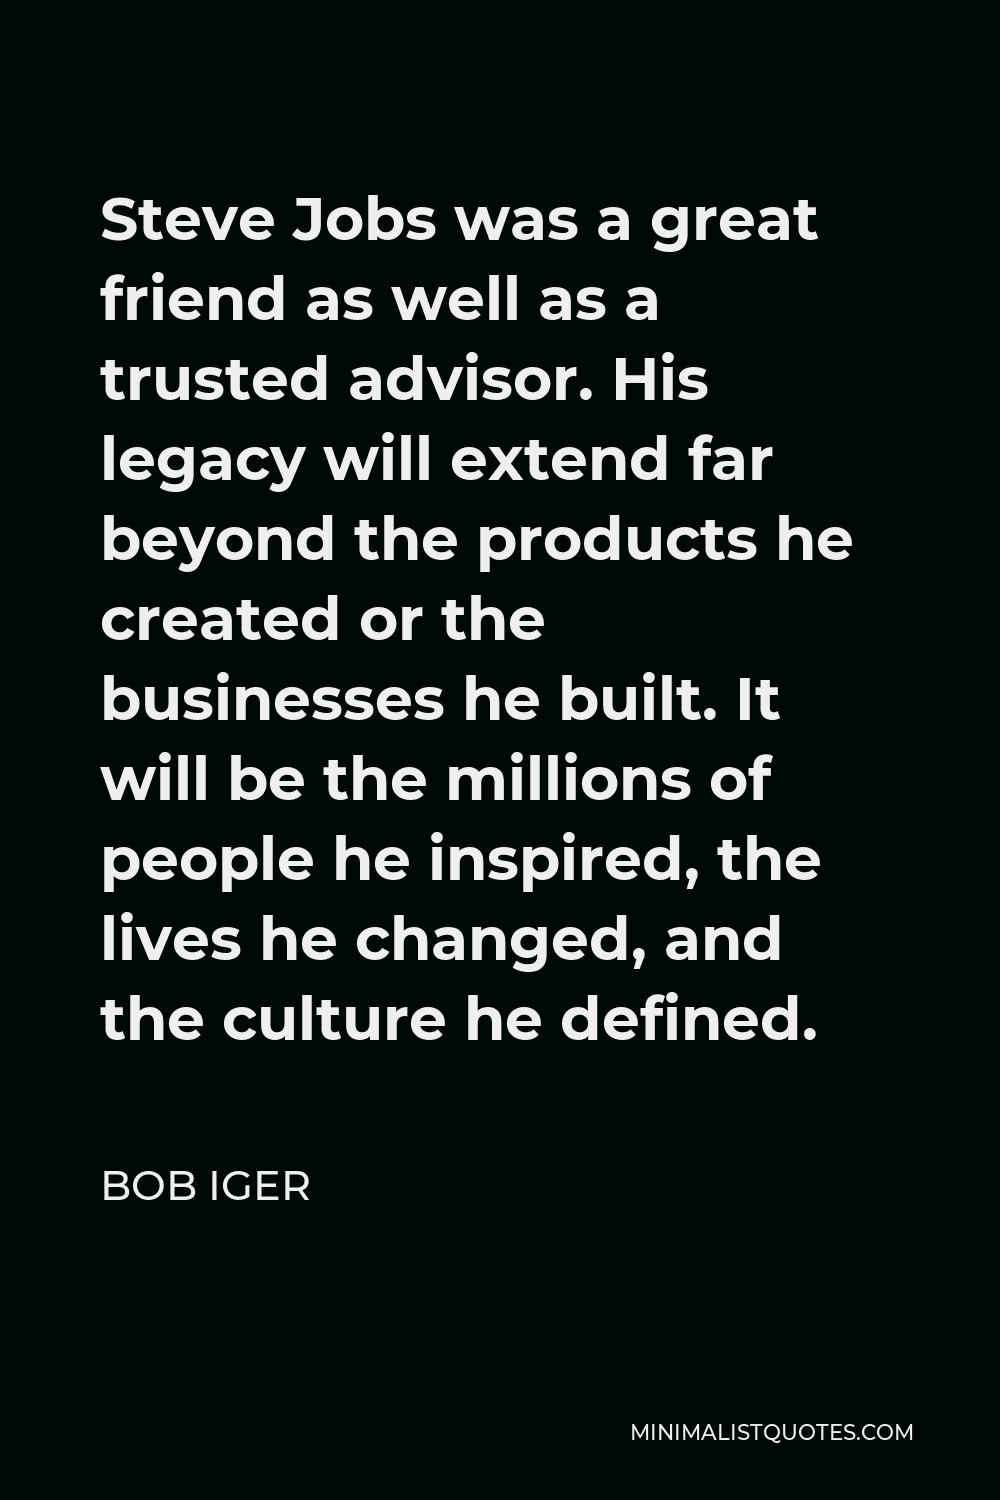 Bob Iger Quote - Steve Jobs was a great friend as well as a trusted advisor. His legacy will extend far beyond the products he created or the businesses he built. It will be the millions of people he inspired, the lives he changed, and the culture he defined.